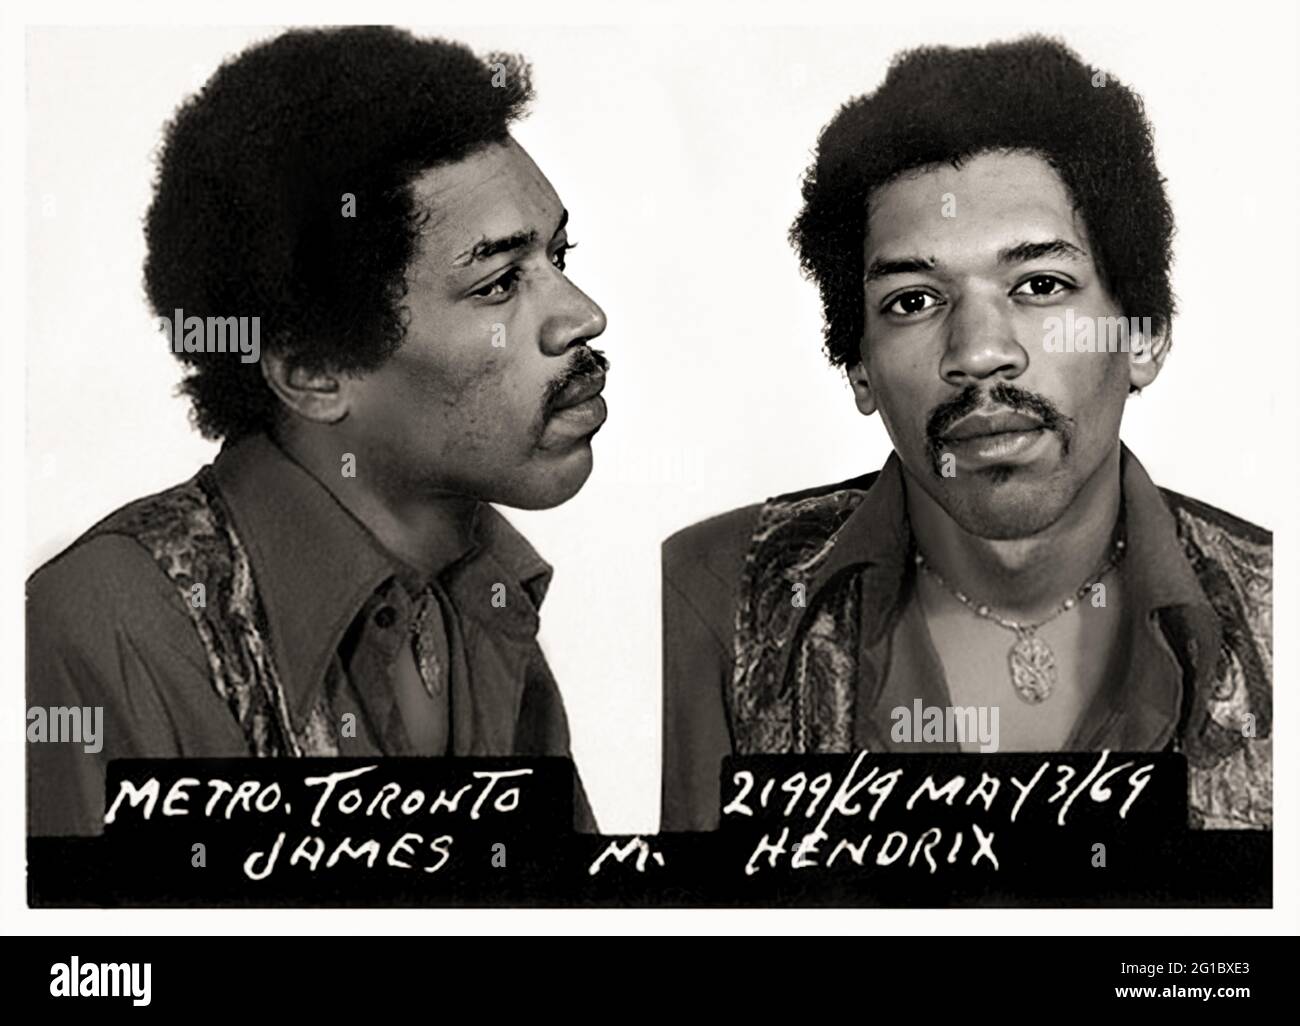 1969, 3 may , Toronto , CANADA : The celebrated american Rockstar singer and guitarist JIMI HENDRIX ( 1942 - 1970 ) when was arrested arrested , tried and acquitted in Canada for drug possession at Toronto International Airport by Police Department of Toronto ( Canada ) in the official mug-shot .  Unknown photographer , Toronto . - James Marshall Johnny Allen Hendrix -  HISTORY - FOTO STORICHE  - MUSIC - MUSICA - cantante - COMPOSITORE - composer - CHITARRISTA - ROCK STAR - ARRESTO - Arrestation - ARRESTATO DALLA POLIZIA - FOTO SEGNALETICA - mugshot - mug shot - rebel - ribelle - baffi - moust Stock Photo